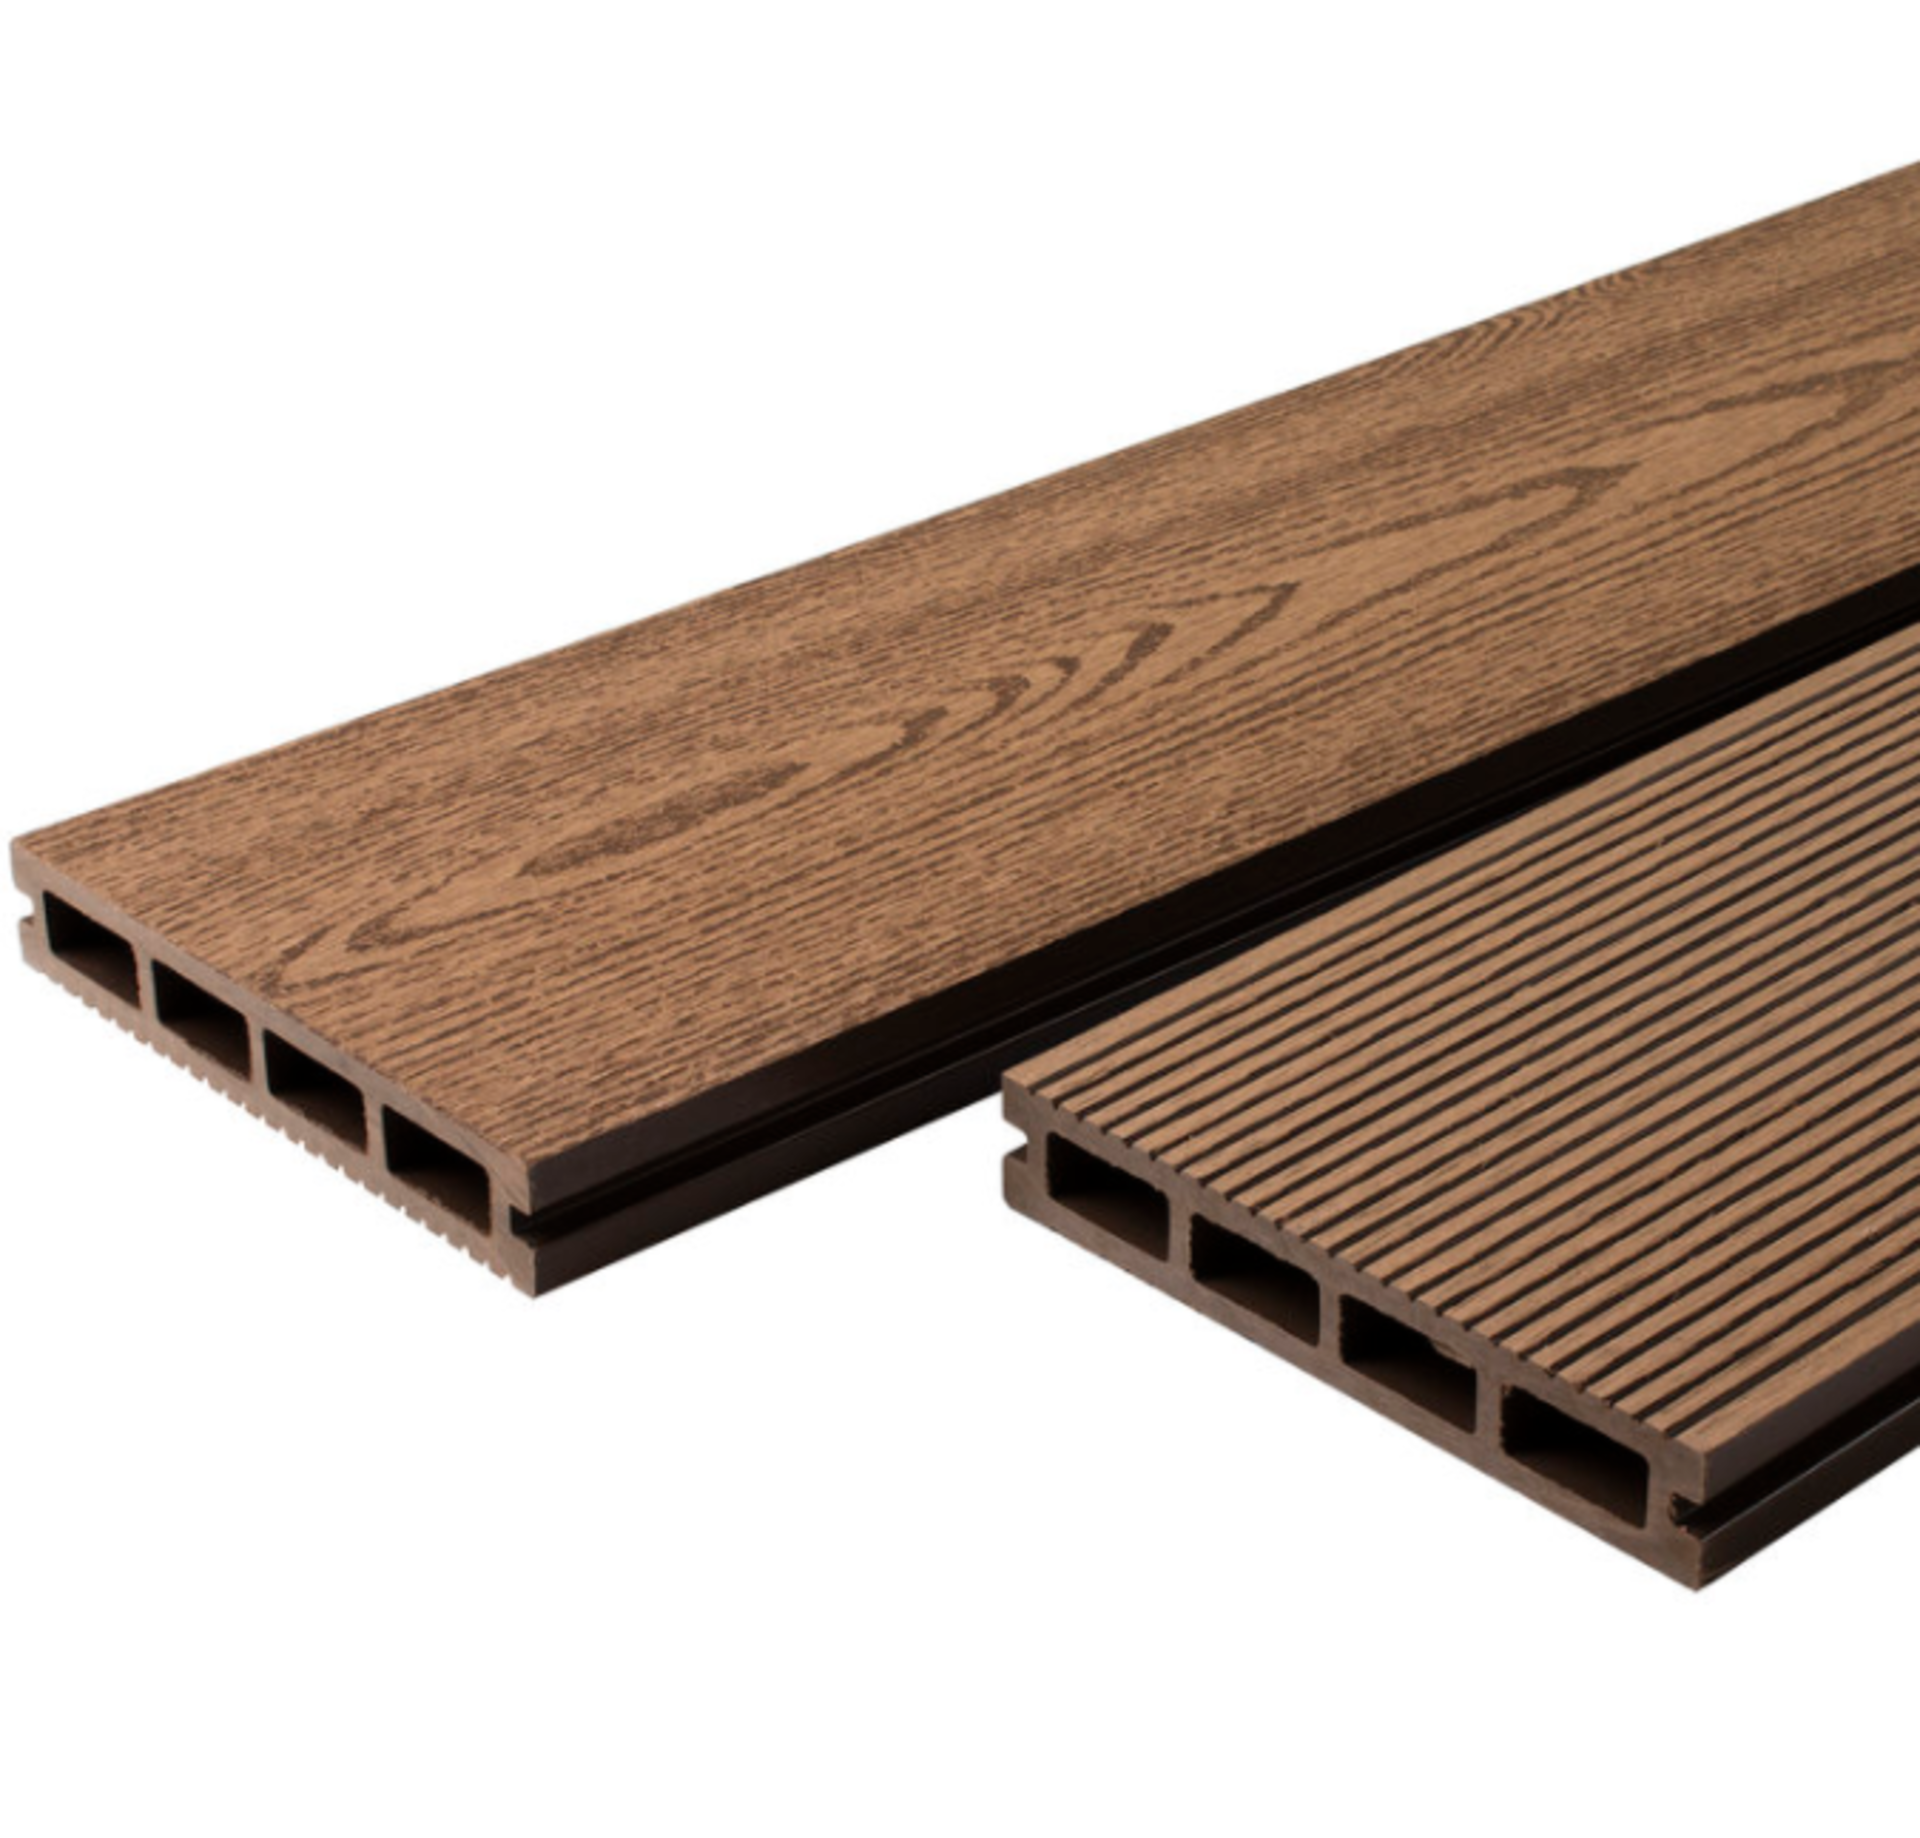 * Complete Coffee Brown WPC decking Kit 2.9m x 2.9m includes joists - clips - decking - screws & fix - Image 2 of 2